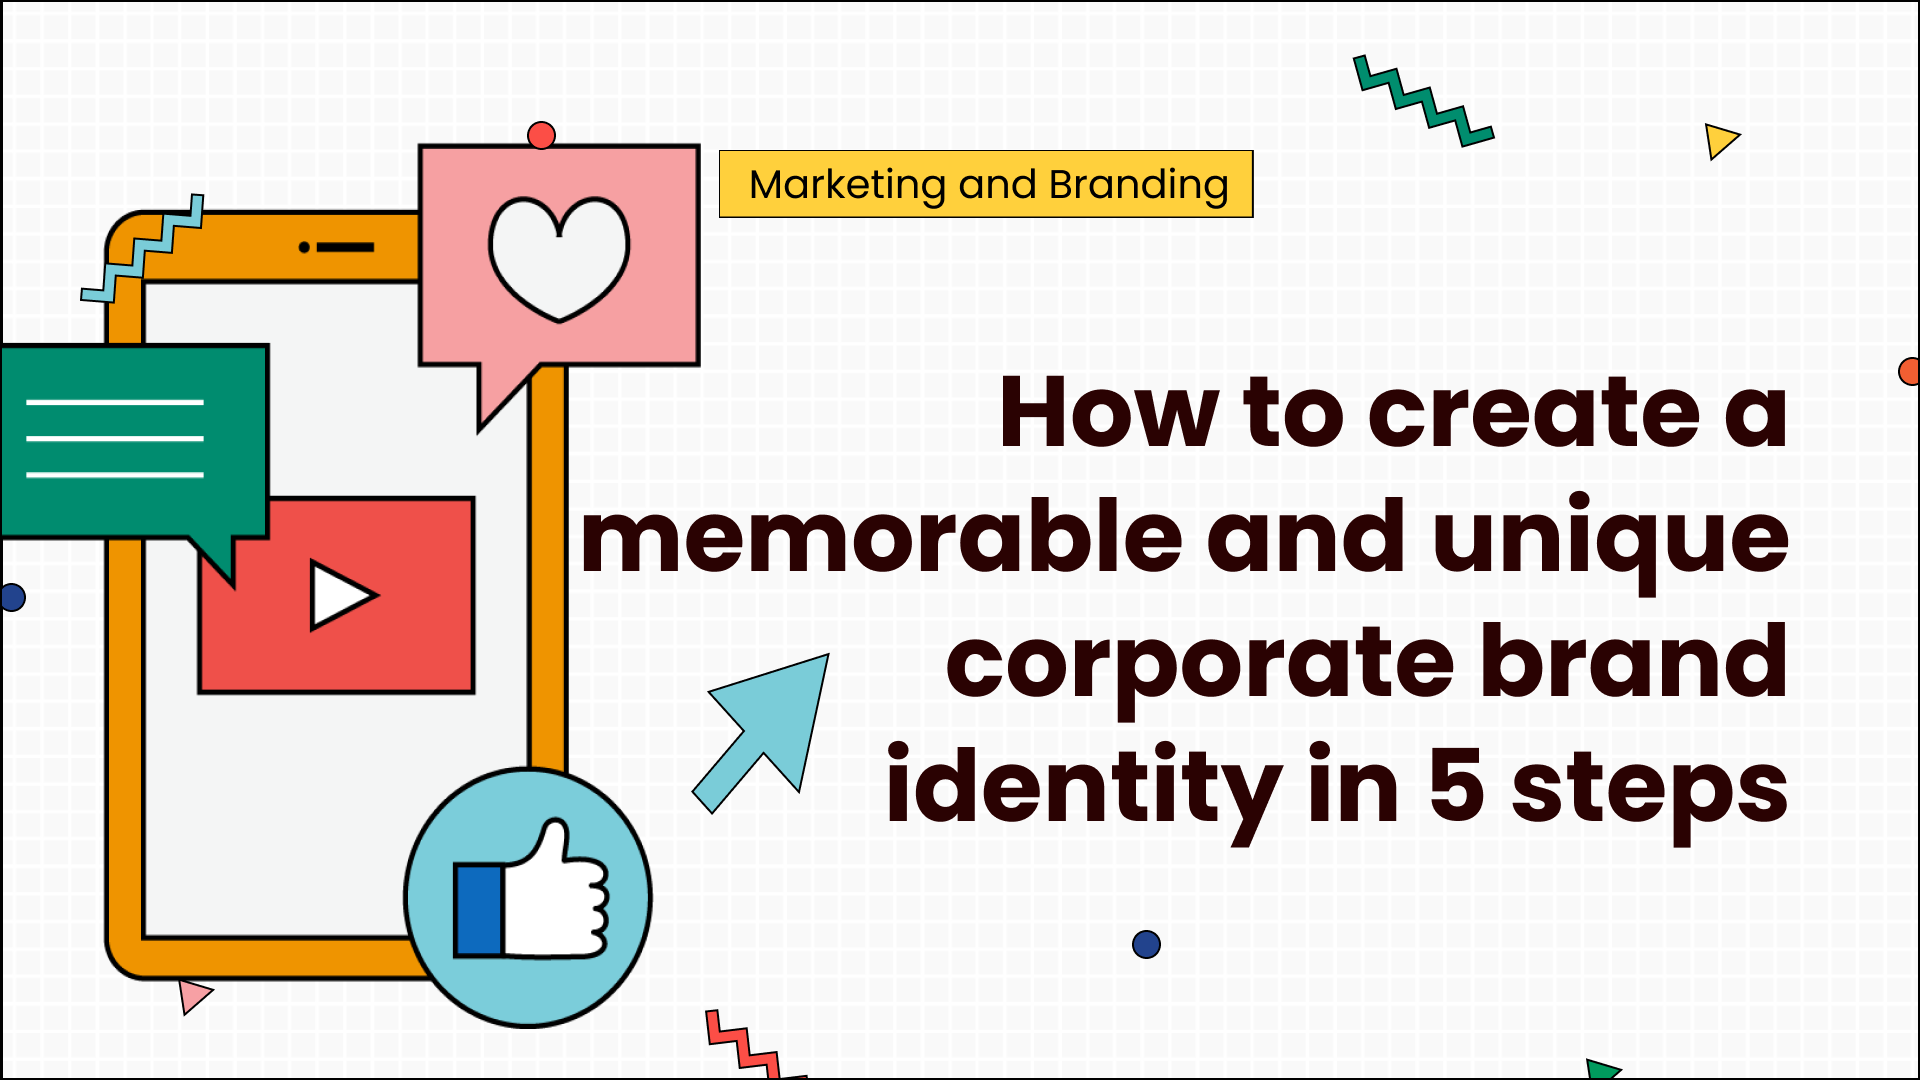 How to create a memorable and unique corporate brand identity in 5 steps